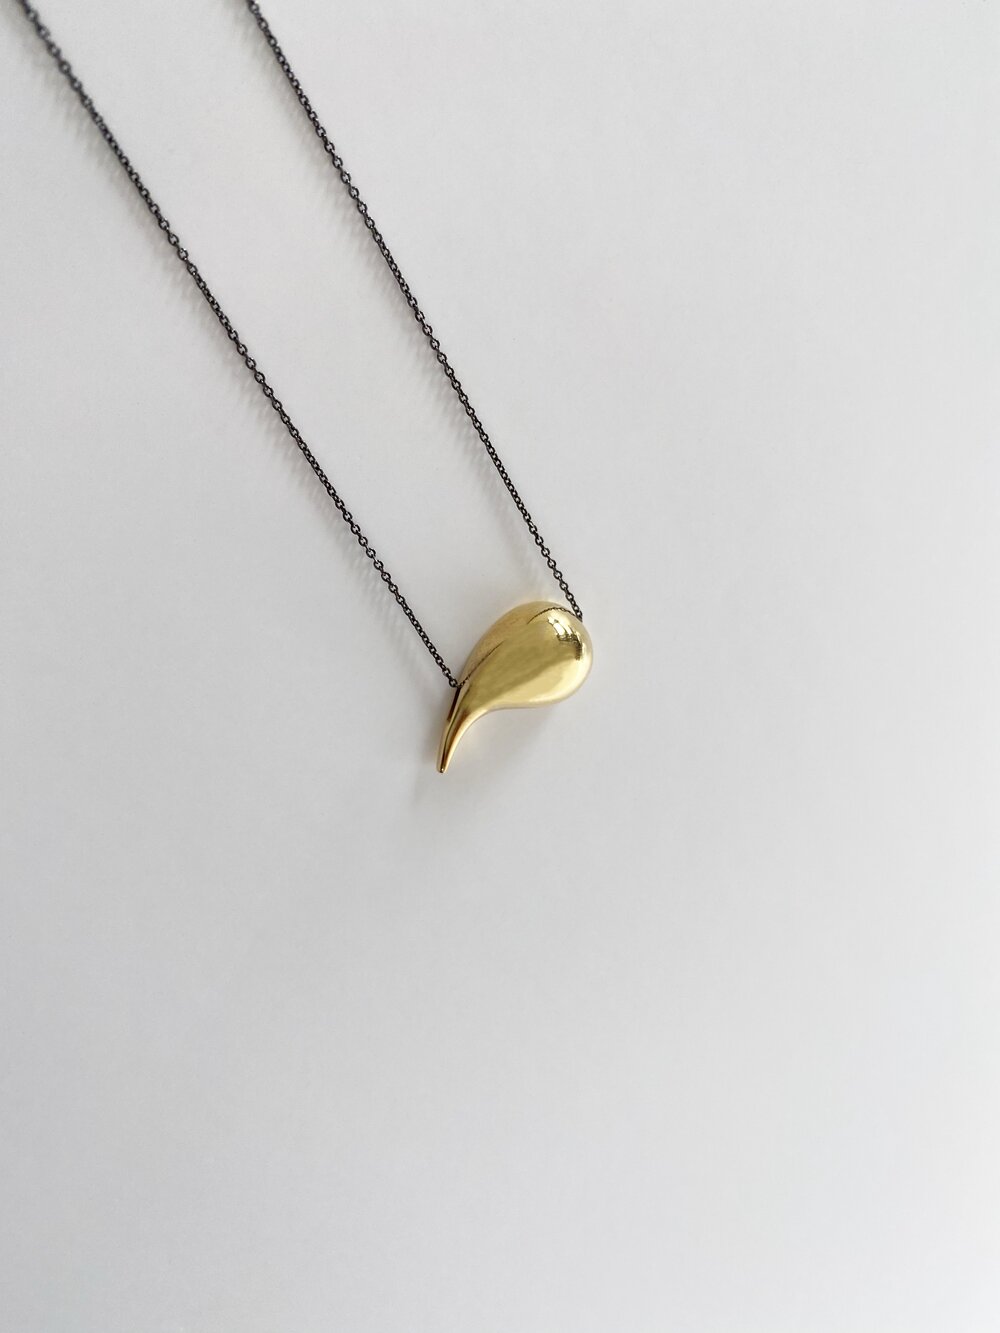  Drops Necklace in 18kt gold plated recycled sterling silver Chain: rhodium plated recycled sterling silver  Designed by Aliki Stroumpouli, handcrafted in Greece. 